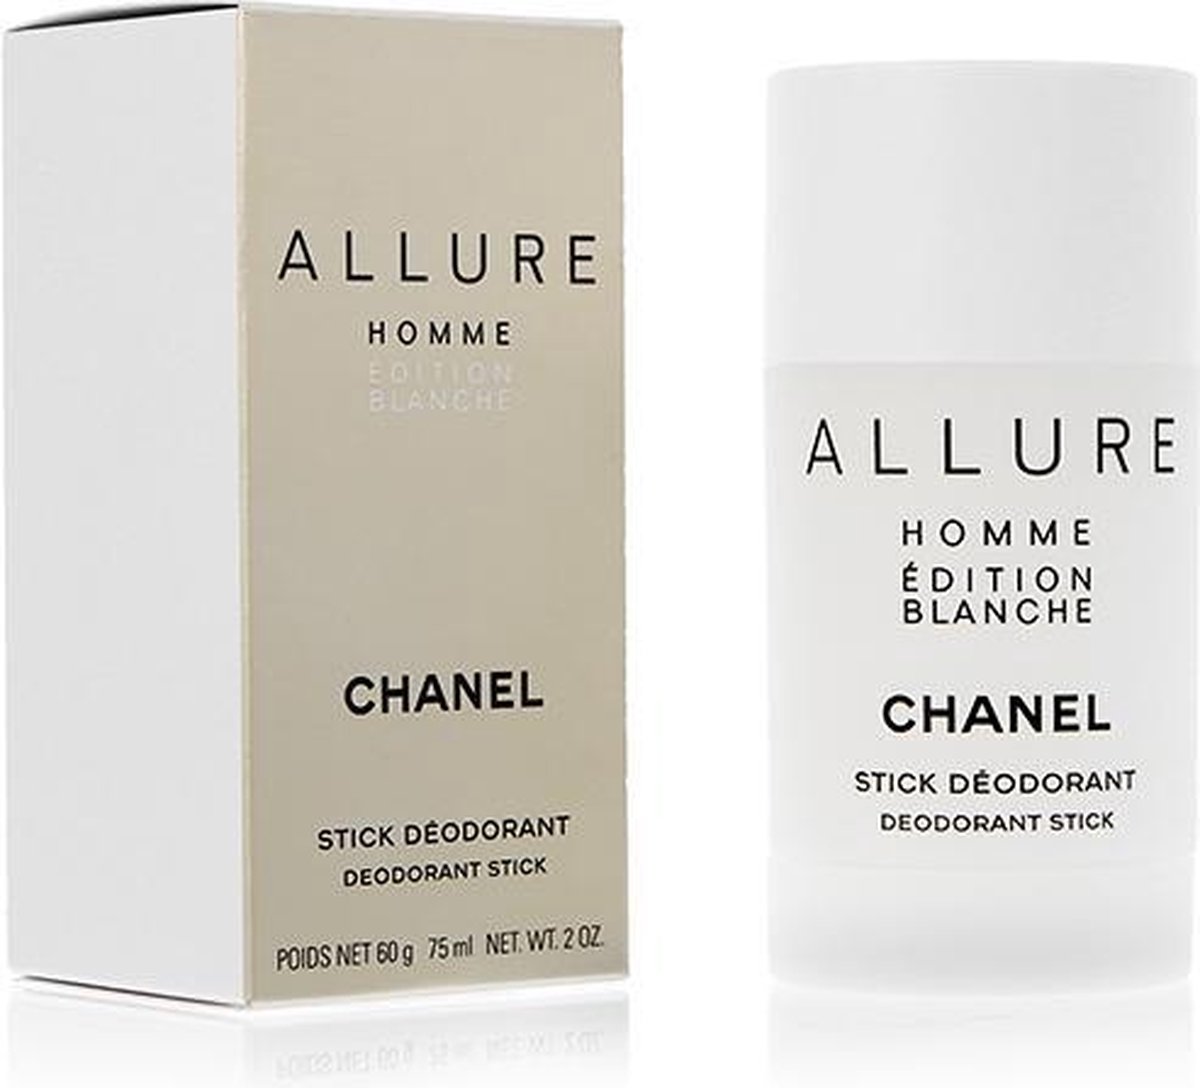 Chanel Allure Homme Edition Blanche - Déodorant stick - INCI Beauty